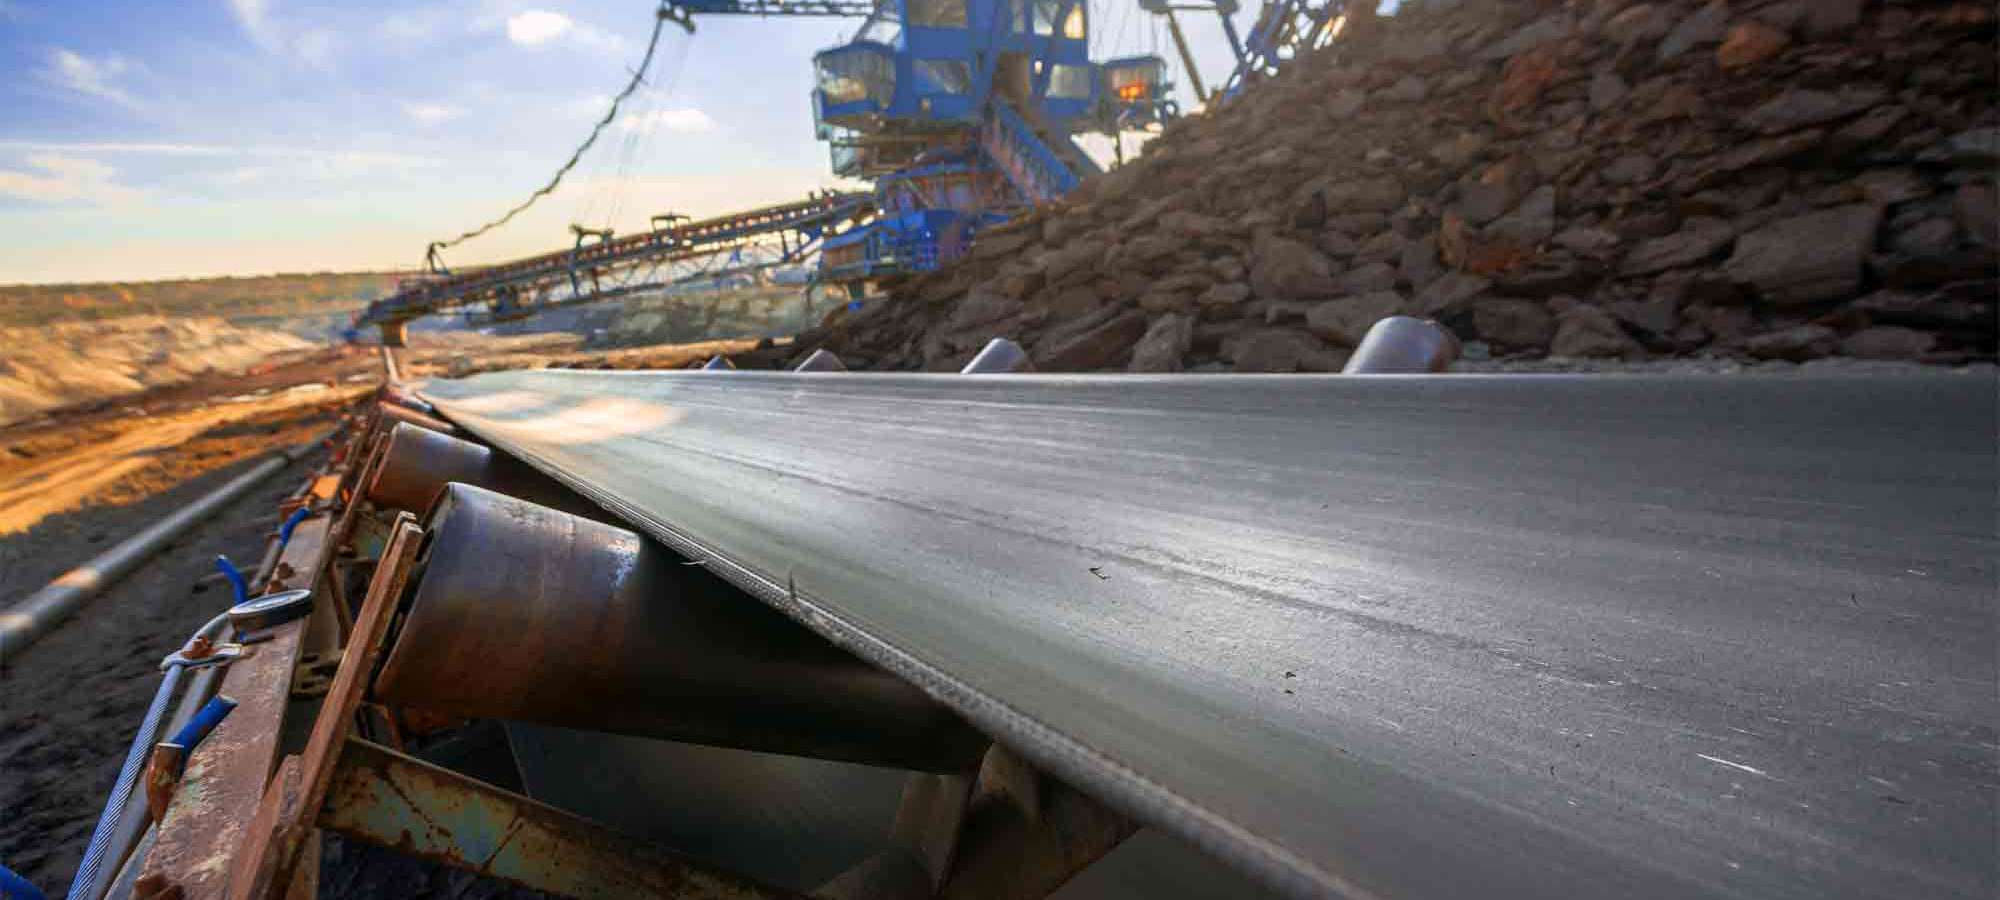 Australian manufacturer and supplier of conveyor to the mining industry